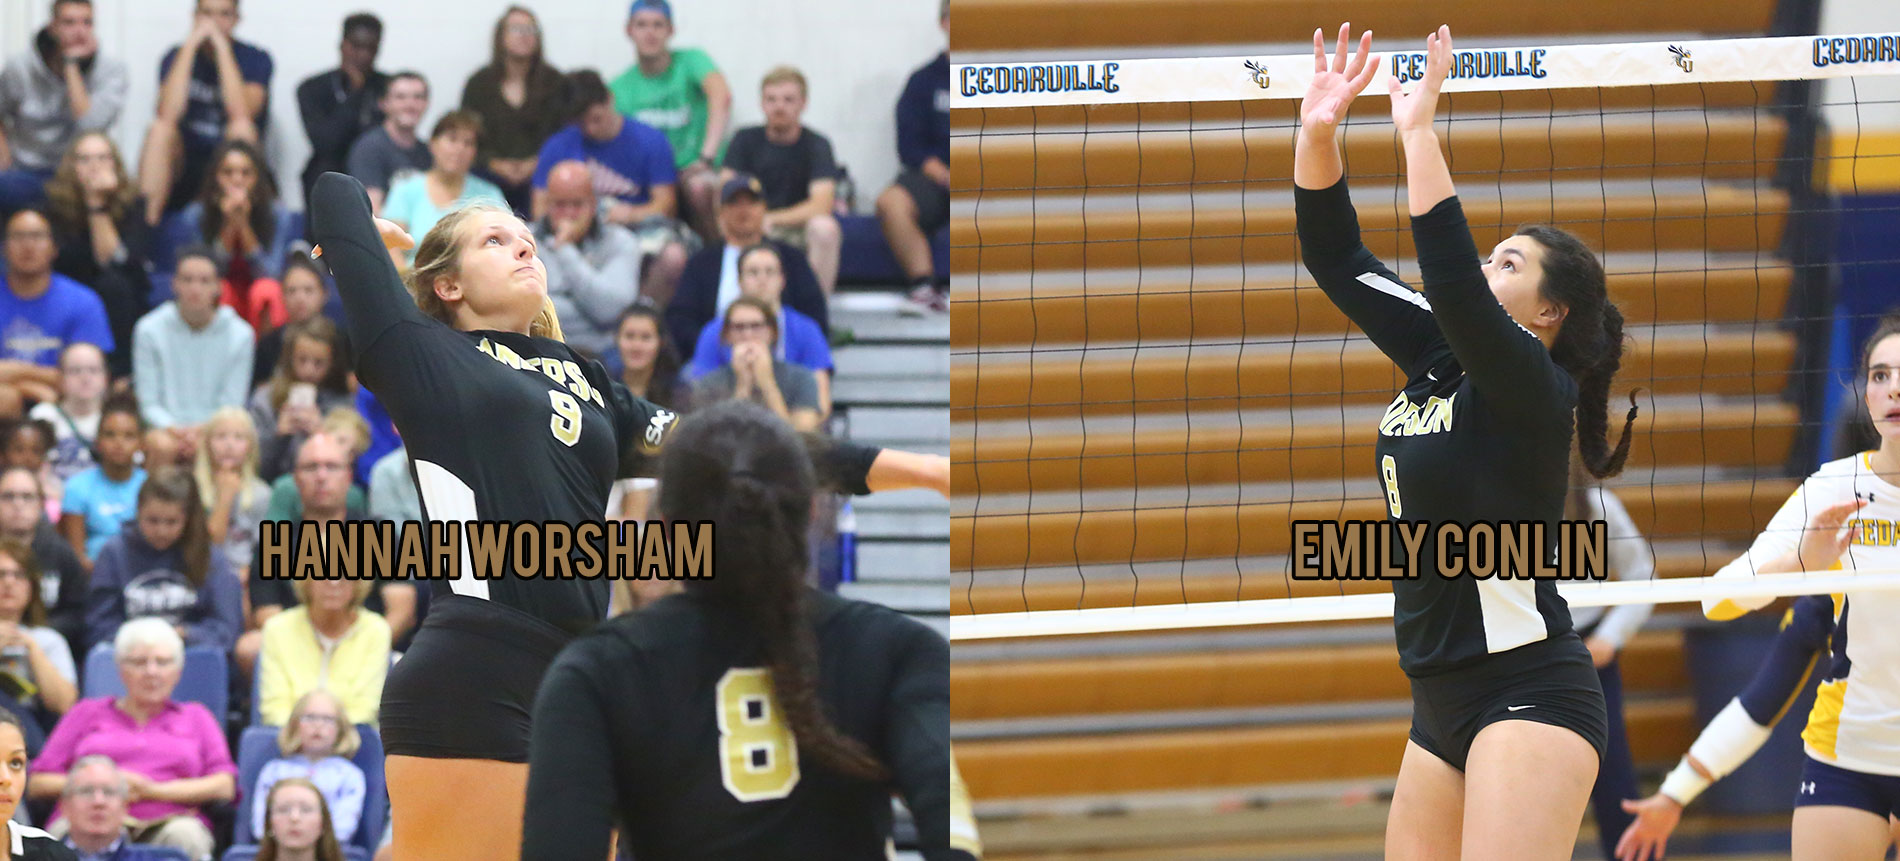 Conlin and Worsham Named to All-Tournament Team